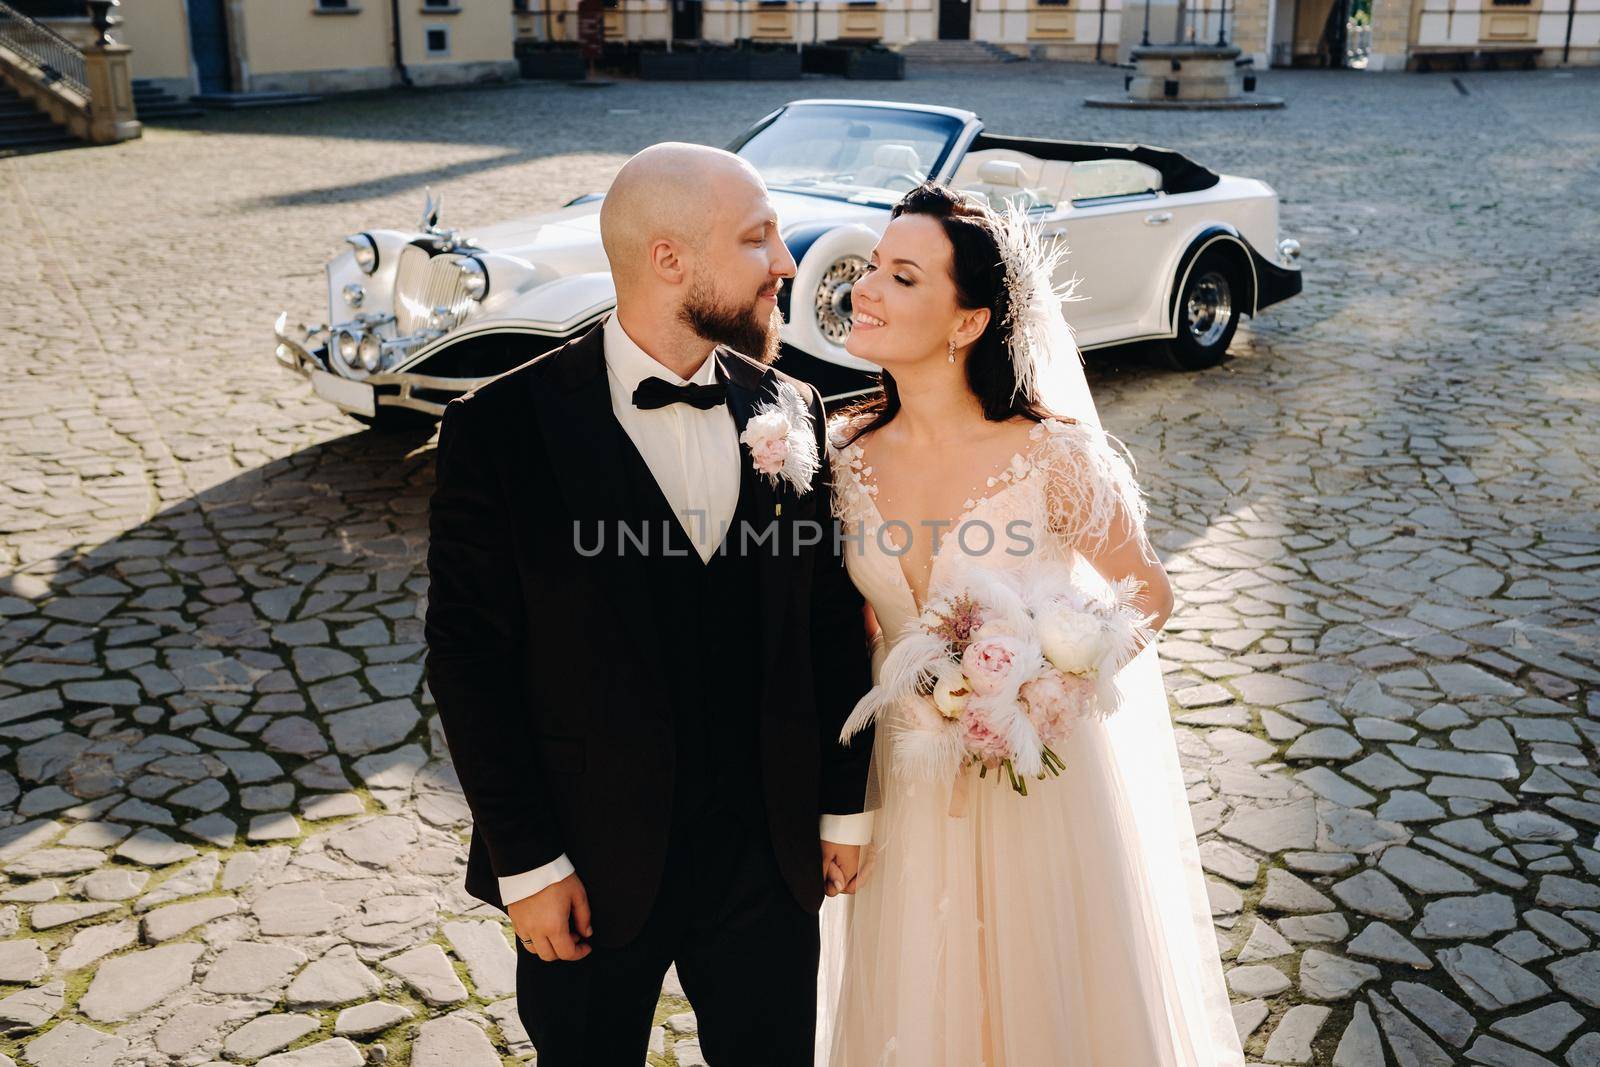 Elegant wedding couple In the courtyard of the castle near a retro car by Lobachad